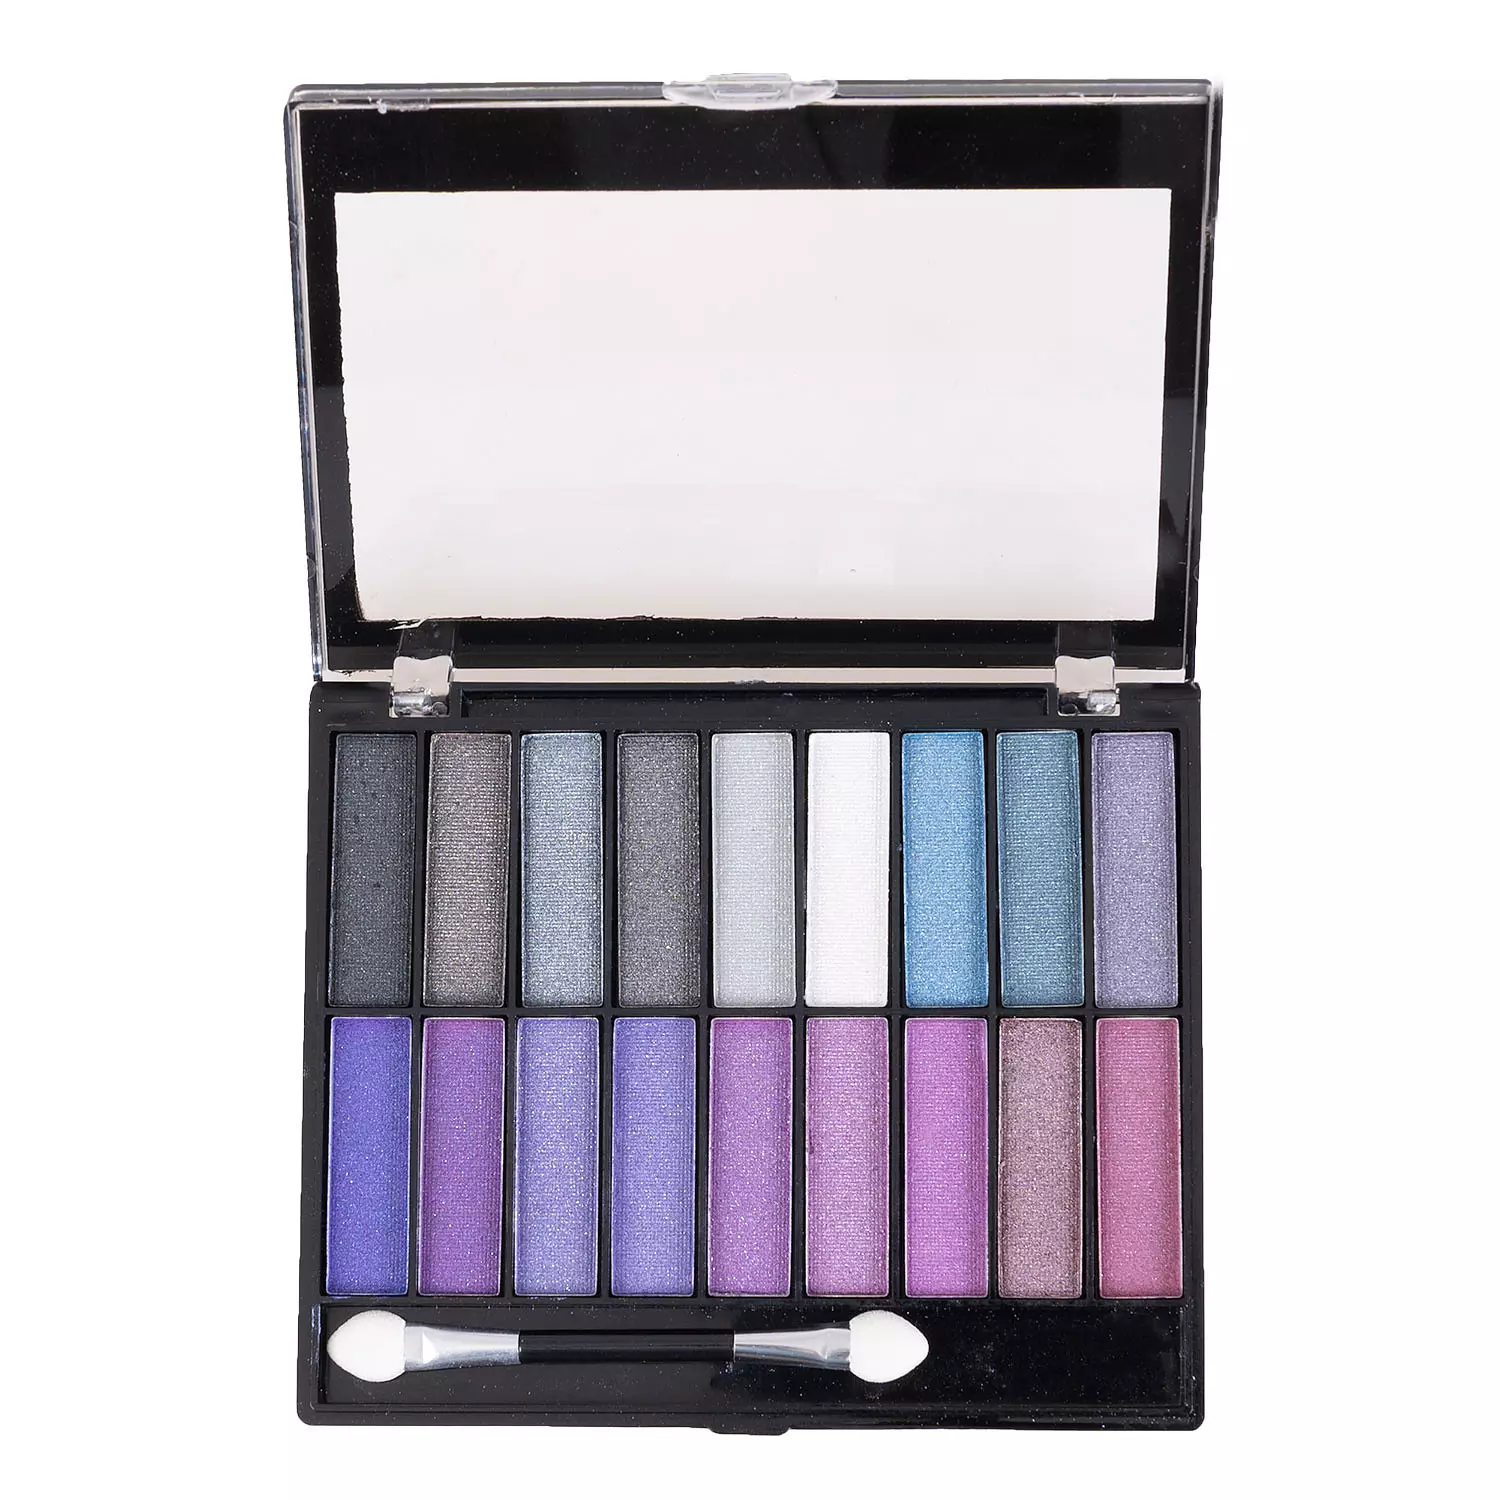 Mariposa - 18-color eye shadow palette, violet by nature